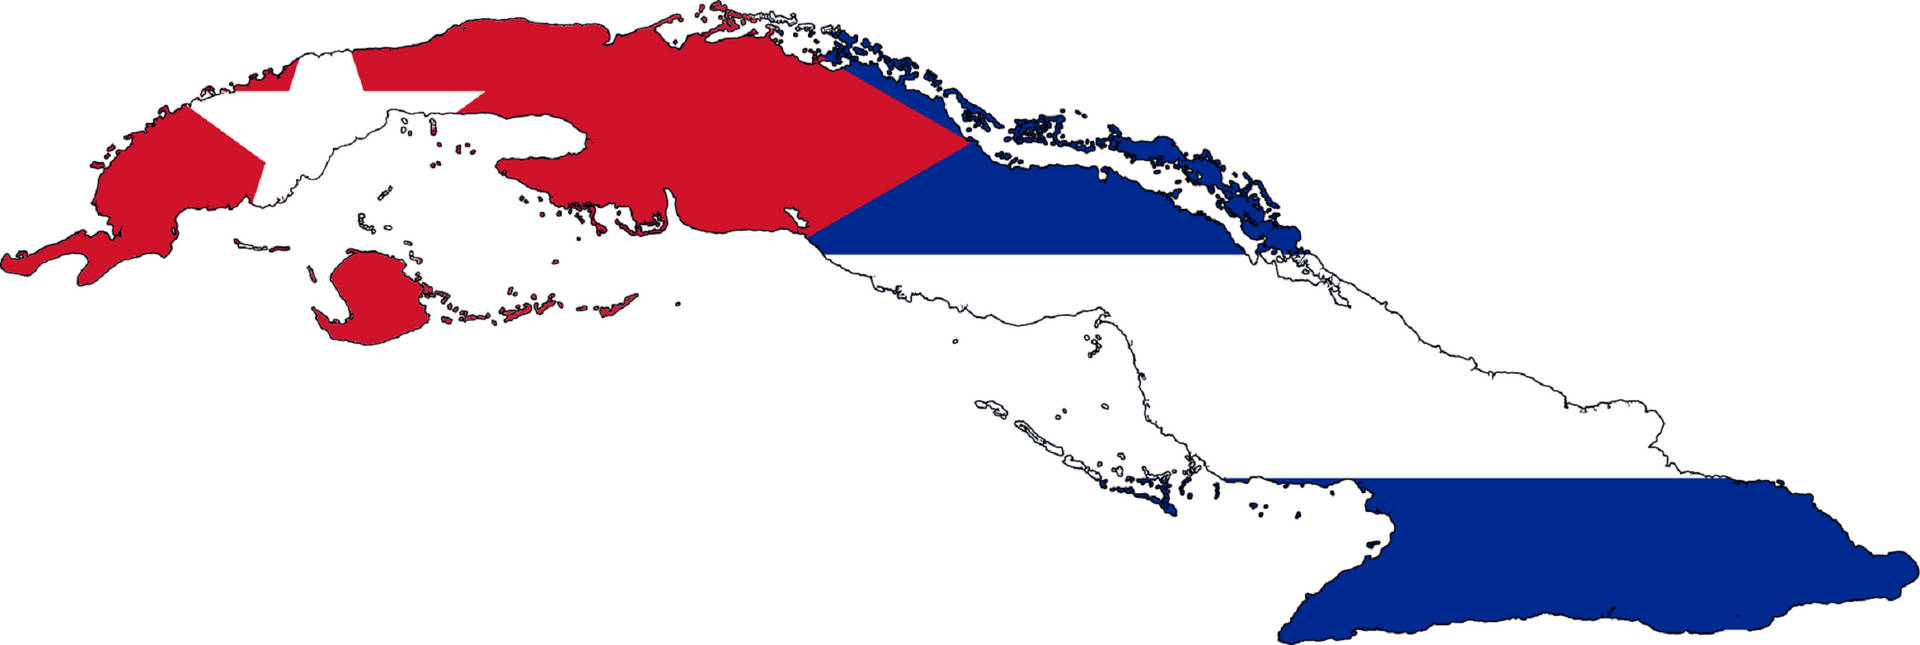 The Vibrant Cuban Flag Displayed Over Cuba's Geographic Map